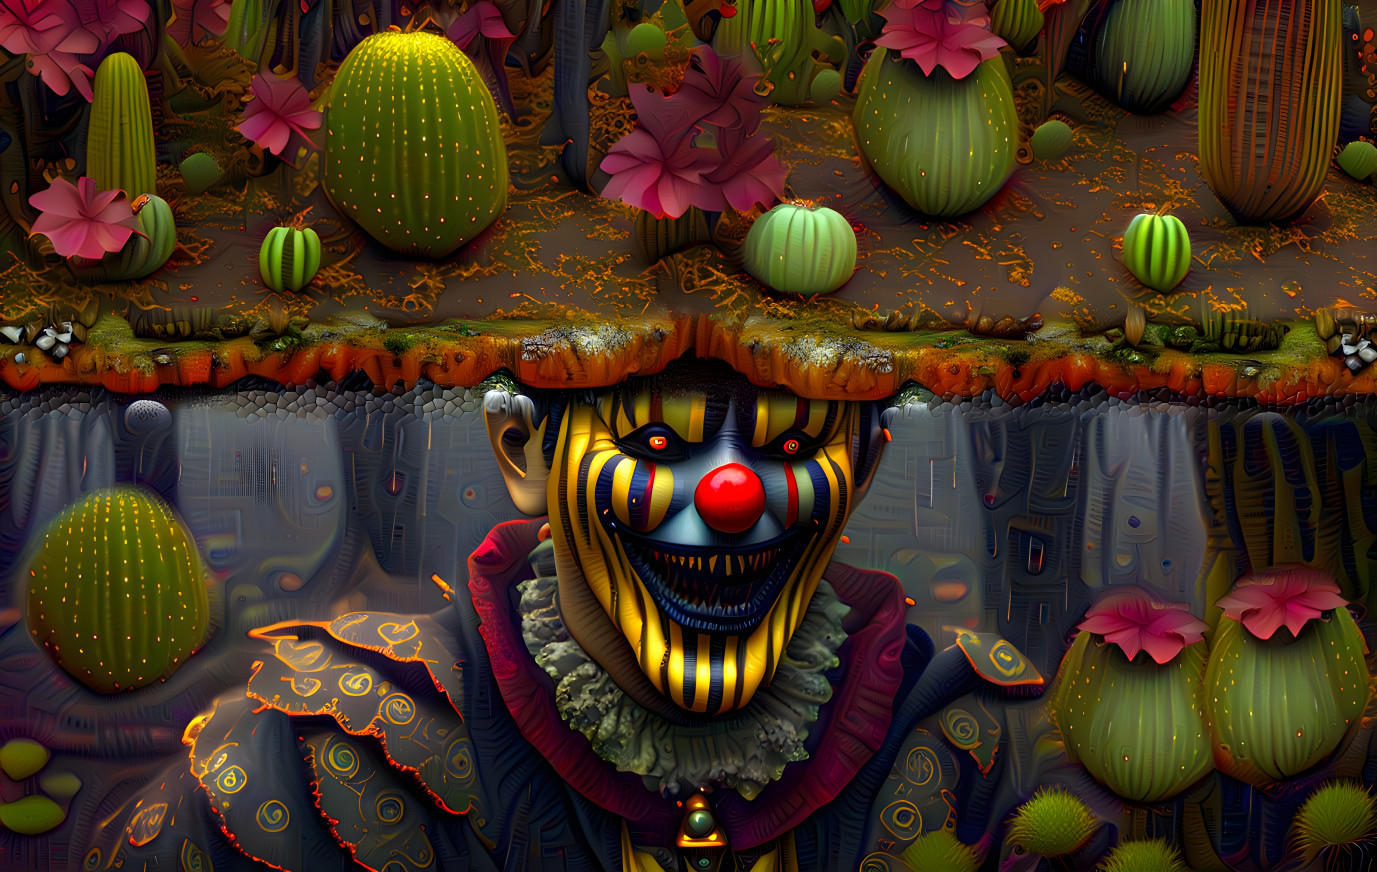 Evil Clowns of the Cactus Forest Paths